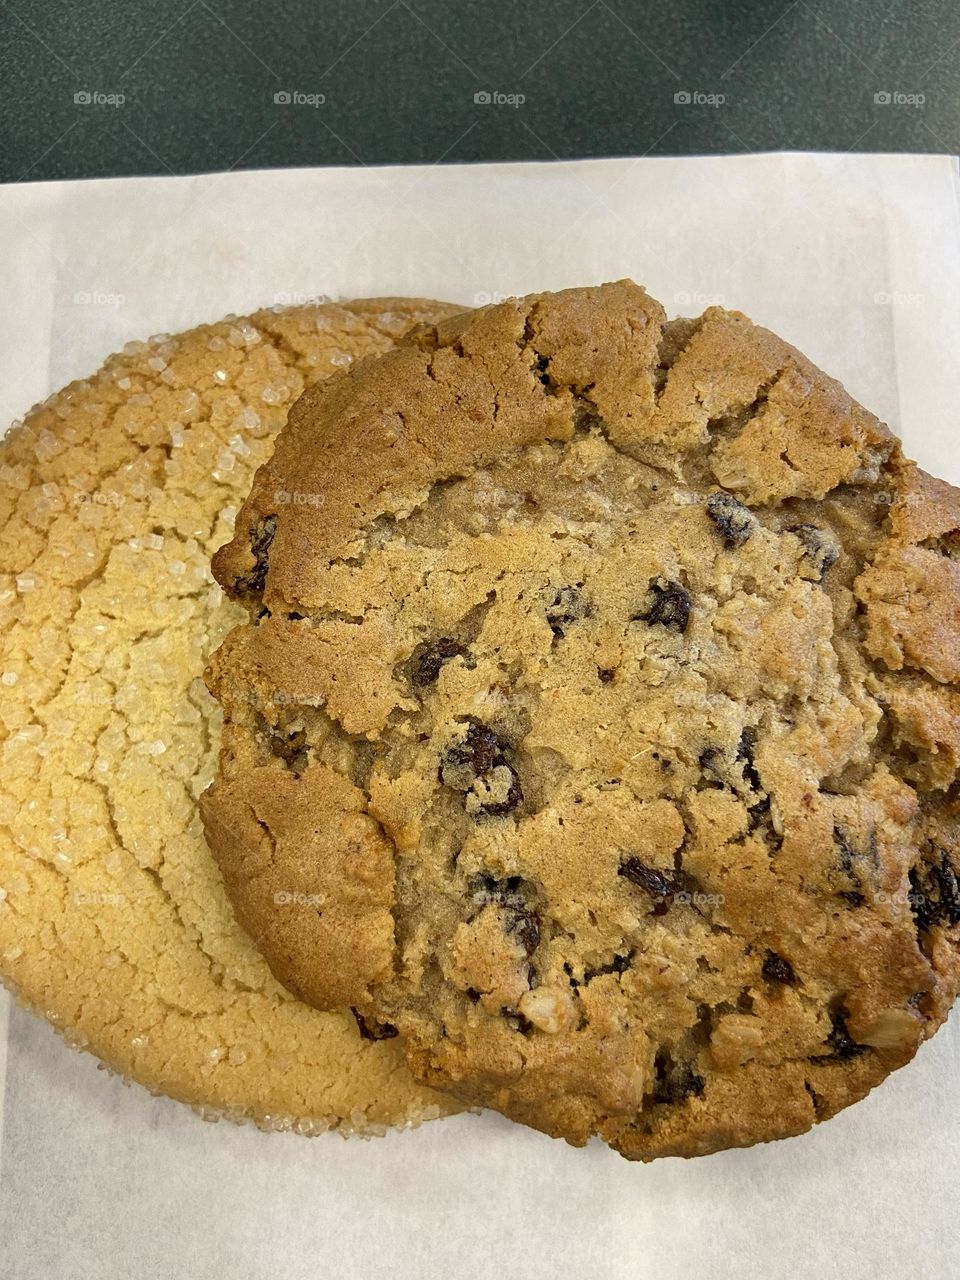 Overlapping cookies, a sugar cookie (one of my favorites) and an oatmeal raisin, both from the bakery cafe at Barnes & Noble bookstore. 